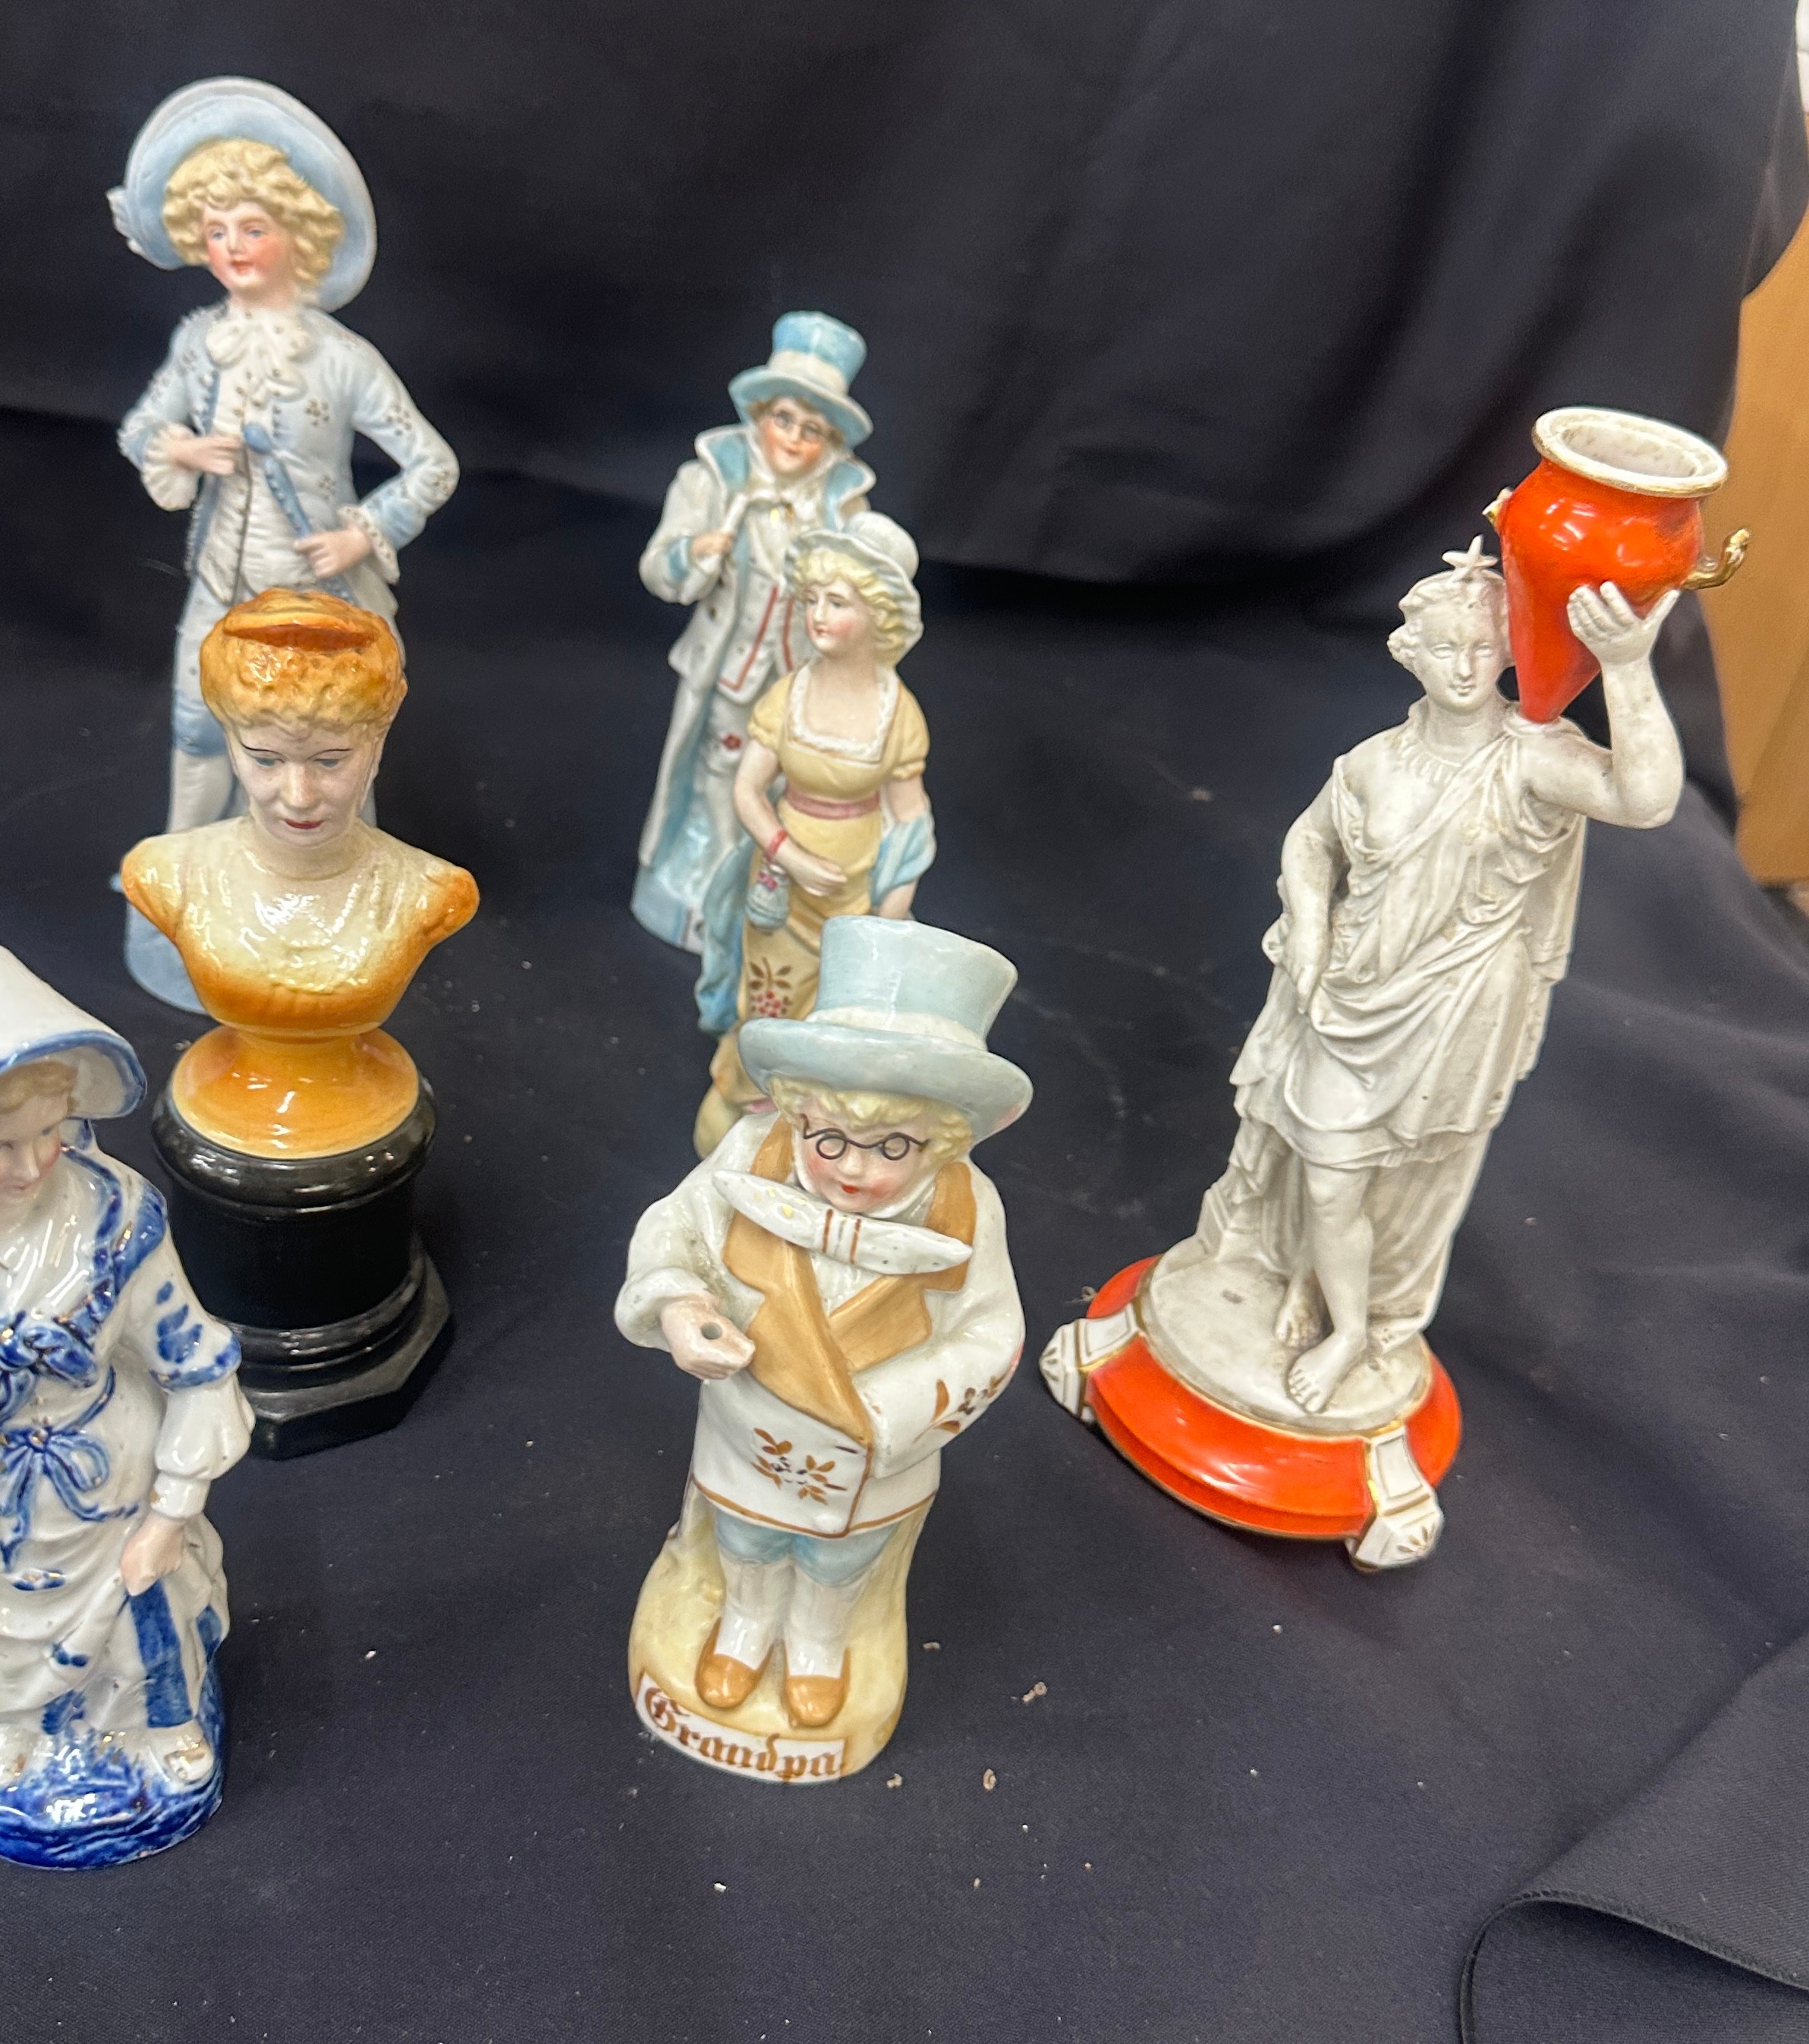 Quantity of antique bisque German figures tallest measures approx 10 inches - Image 5 of 5